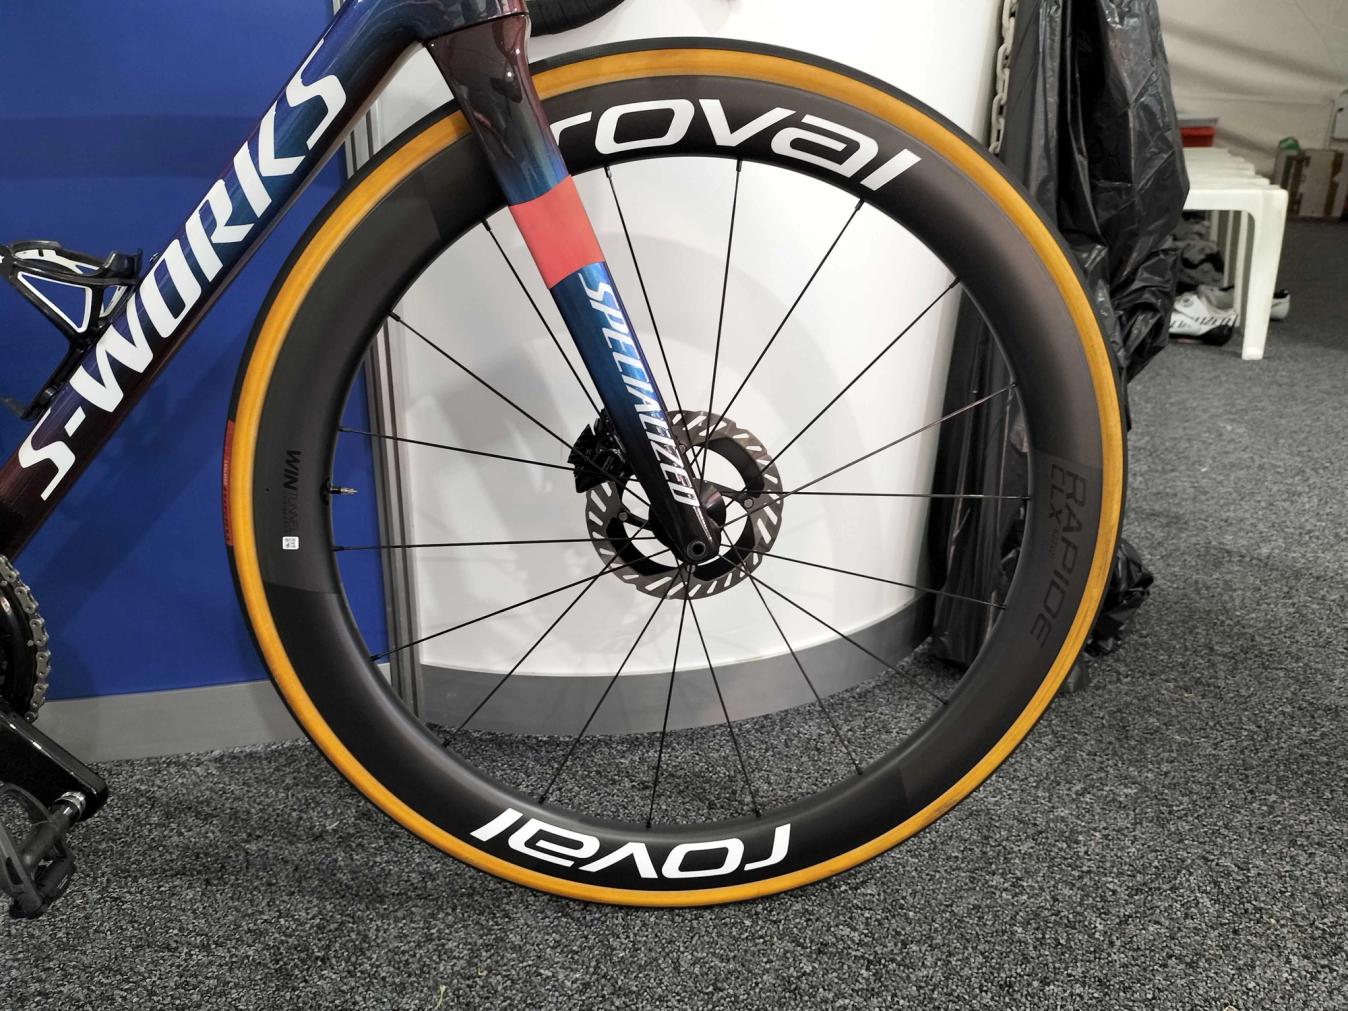 The Roval Rapide CLX II front wheel has a shallower rim than the rear wheel